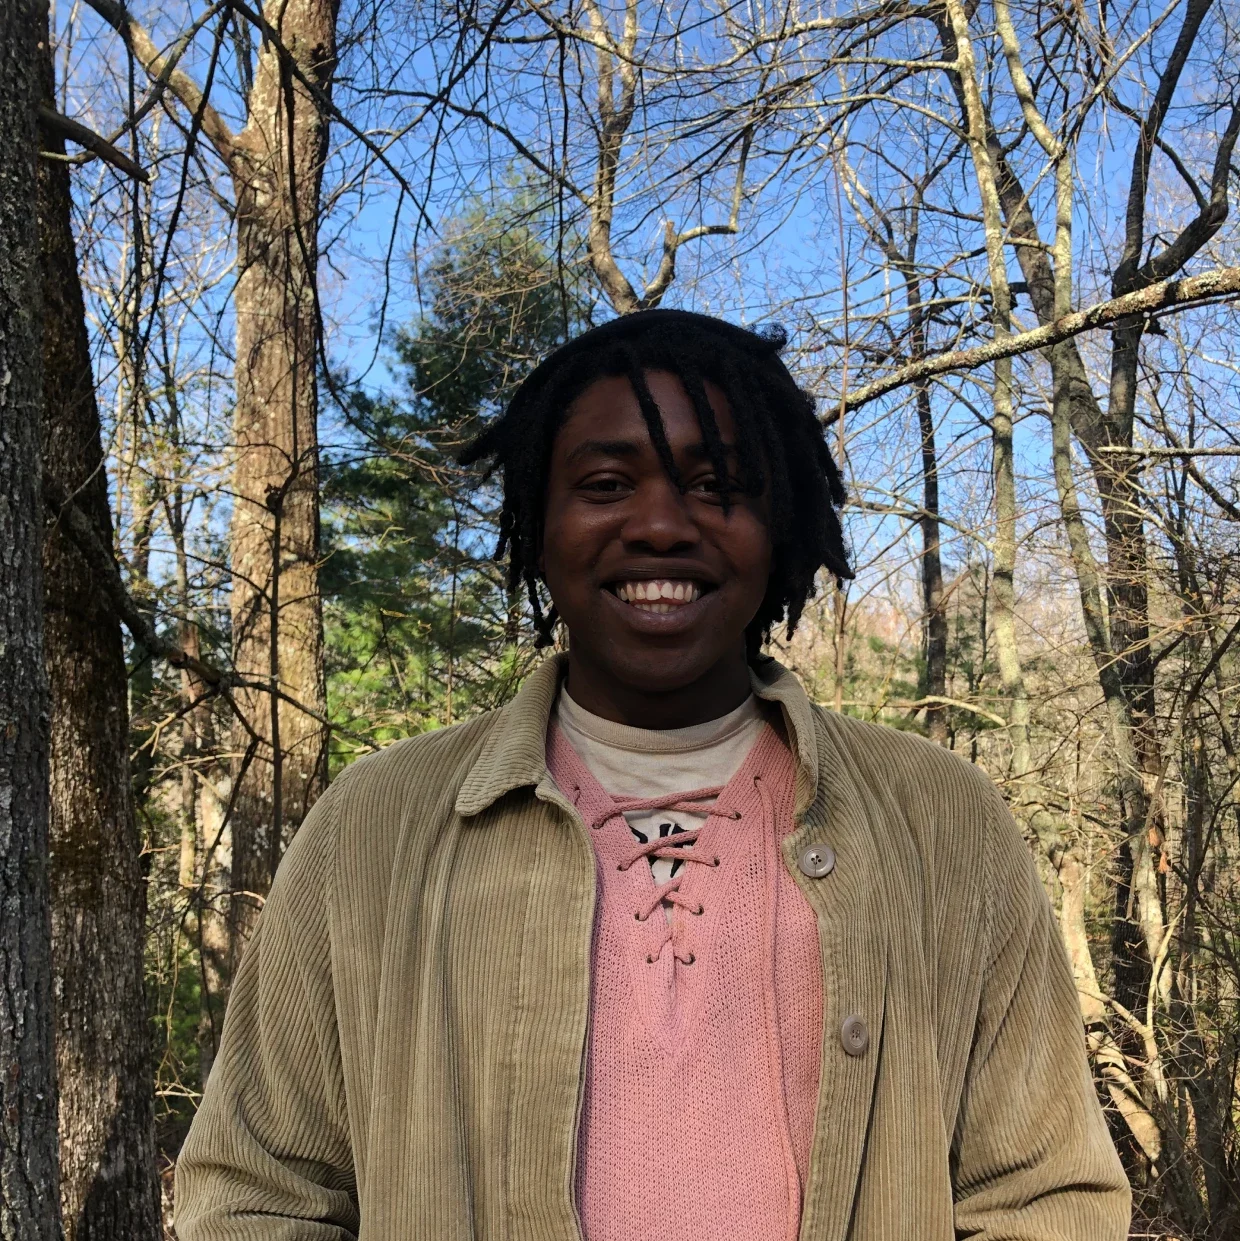 D Davis smiling and standing in front of trees and bright blue sky.